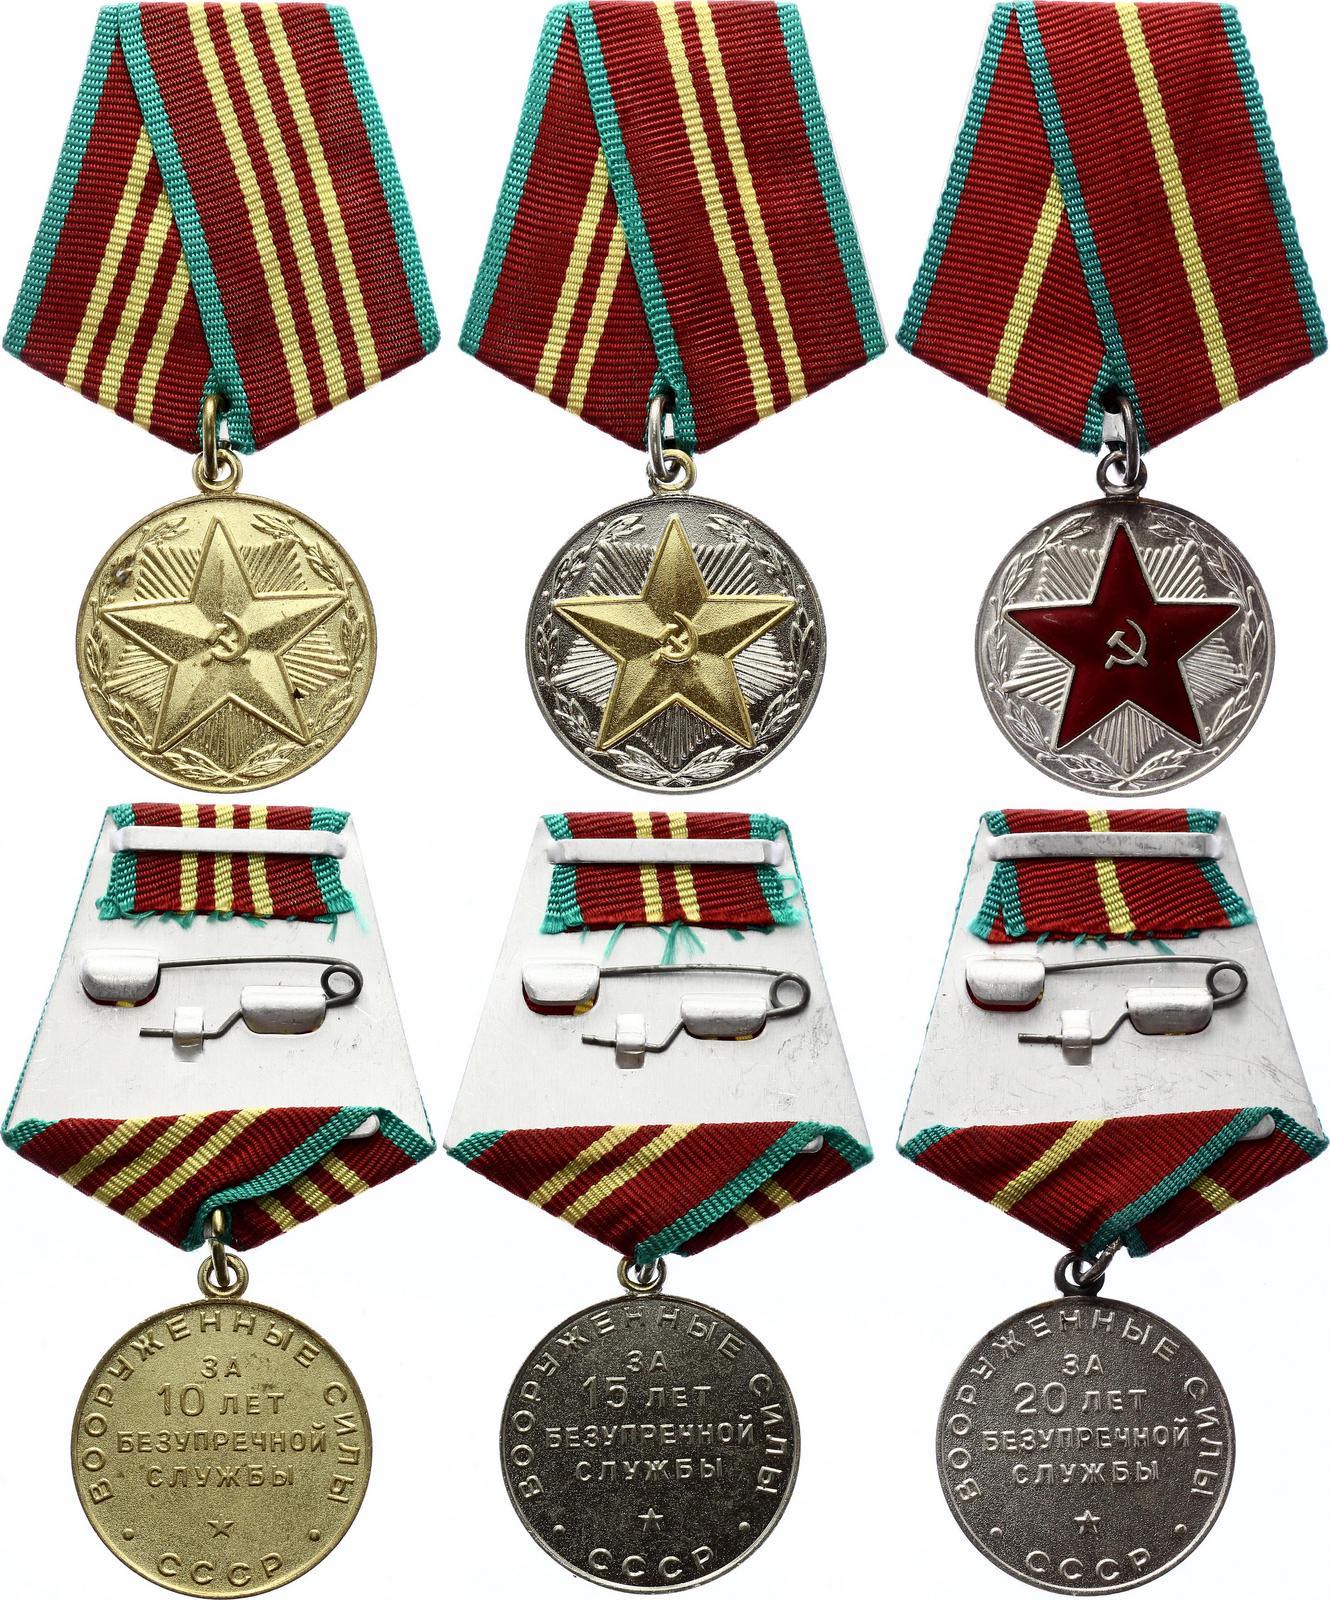 Russia - USSR Full Set of 3 Medals ... 